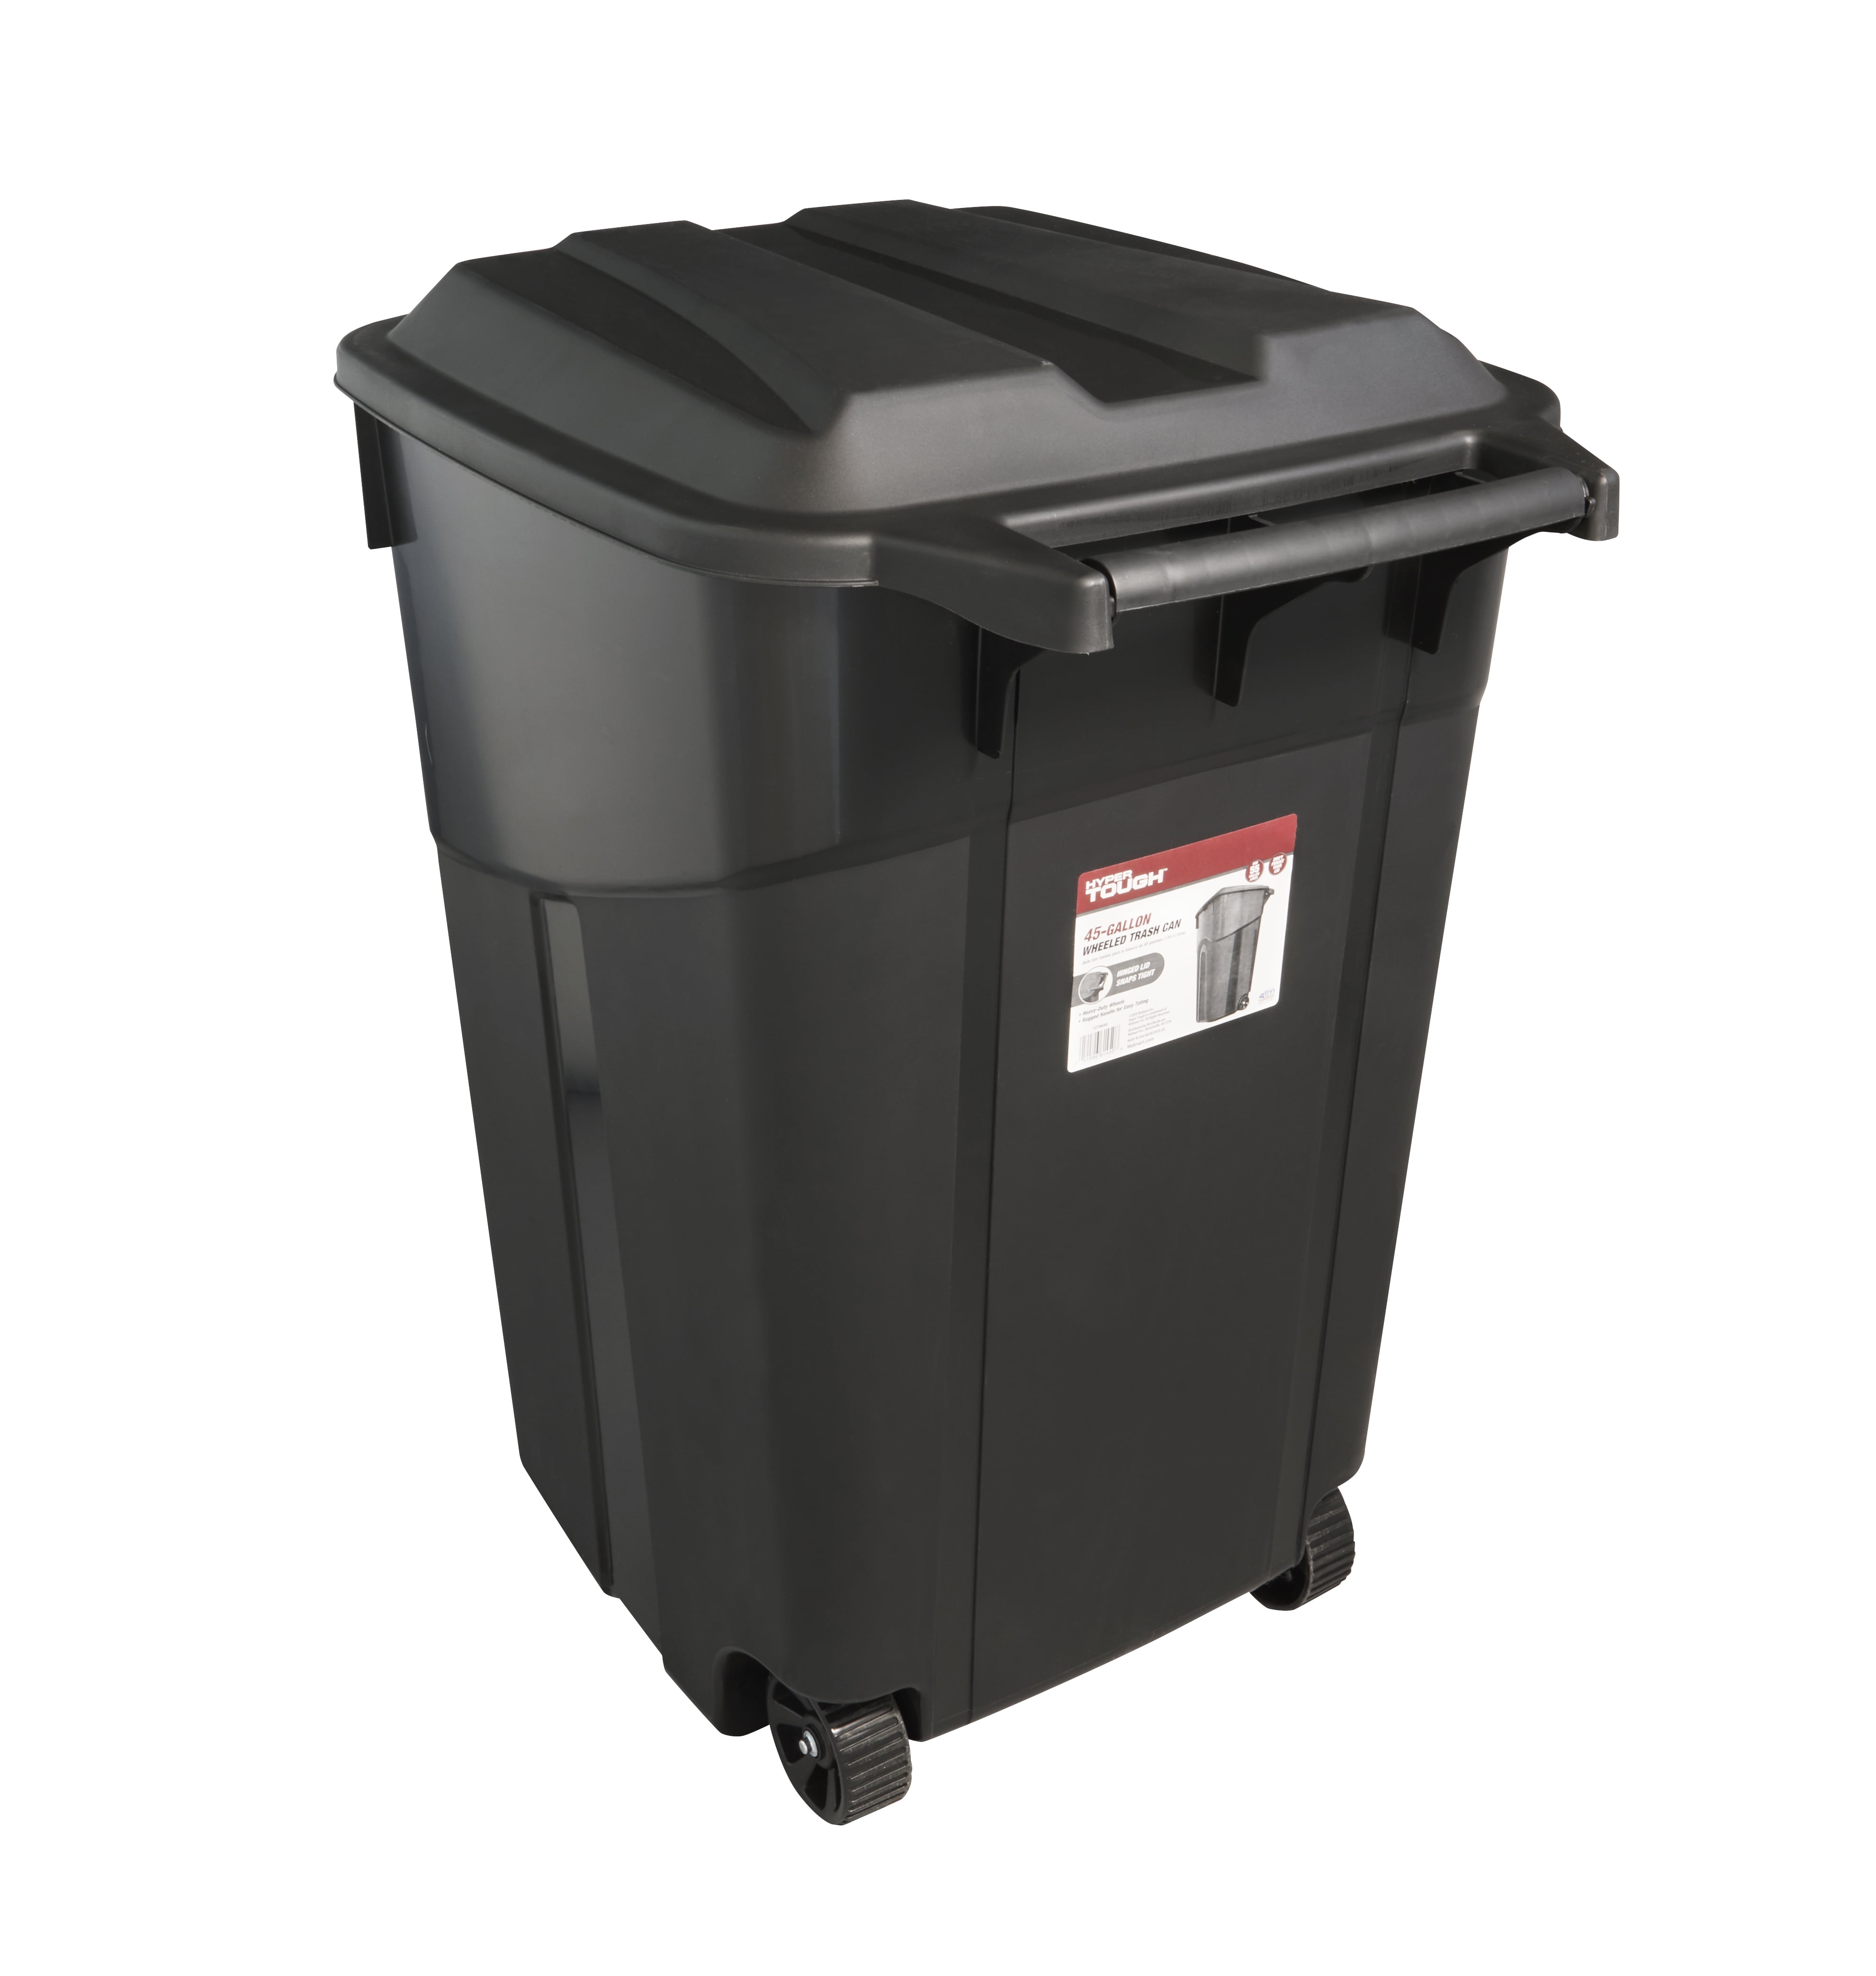 Rubbermaid Heavy Duty Large 45 Gallon Black Wheeled Trash Can with Hinged Lid 